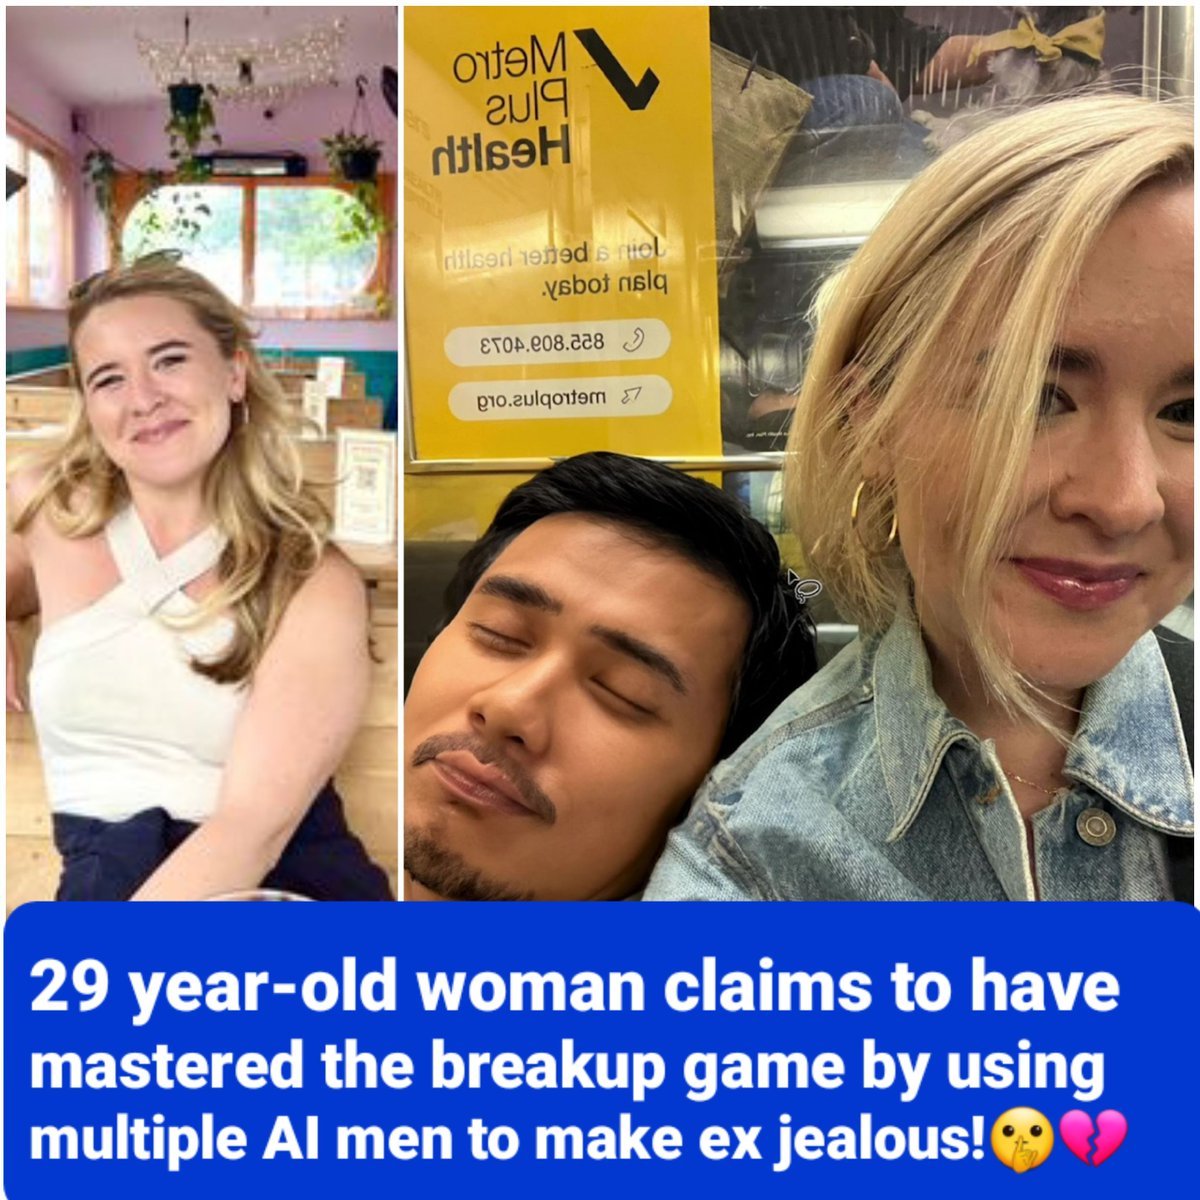 Madeline Salazar, 29, is being trolled as well as appreciated for using AI dudes in her selfies to make the ex jayyy. 🤫💕💔🤳 She claims it totally works! Would you try it?? #AI #jealous #boyfriend